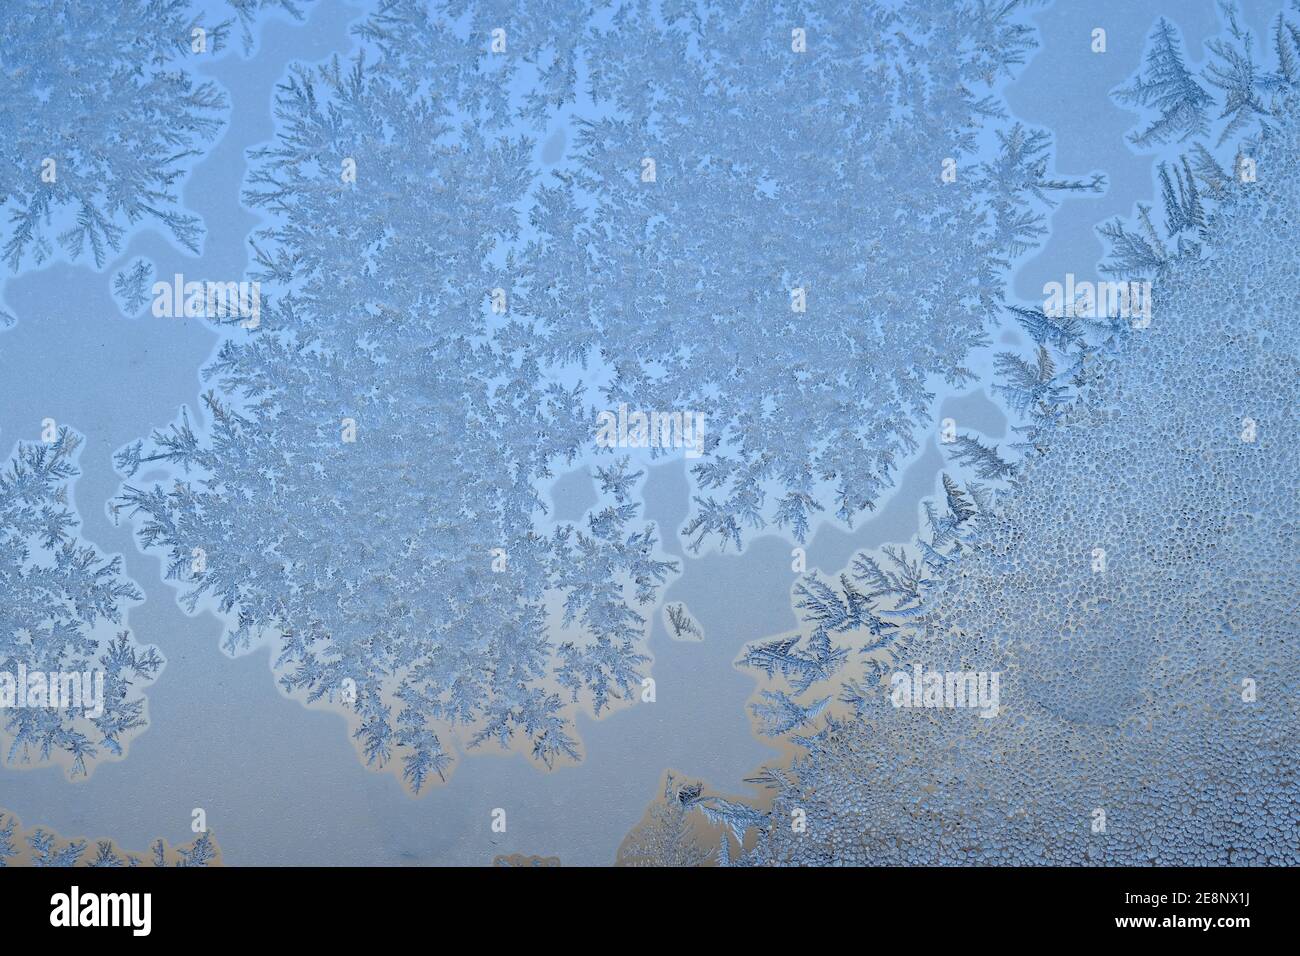 Elaborate and beautiful ice crystal patterns form on my window when it gets below -20C here in Ottawa, Ontario, Canada. Stock Photo